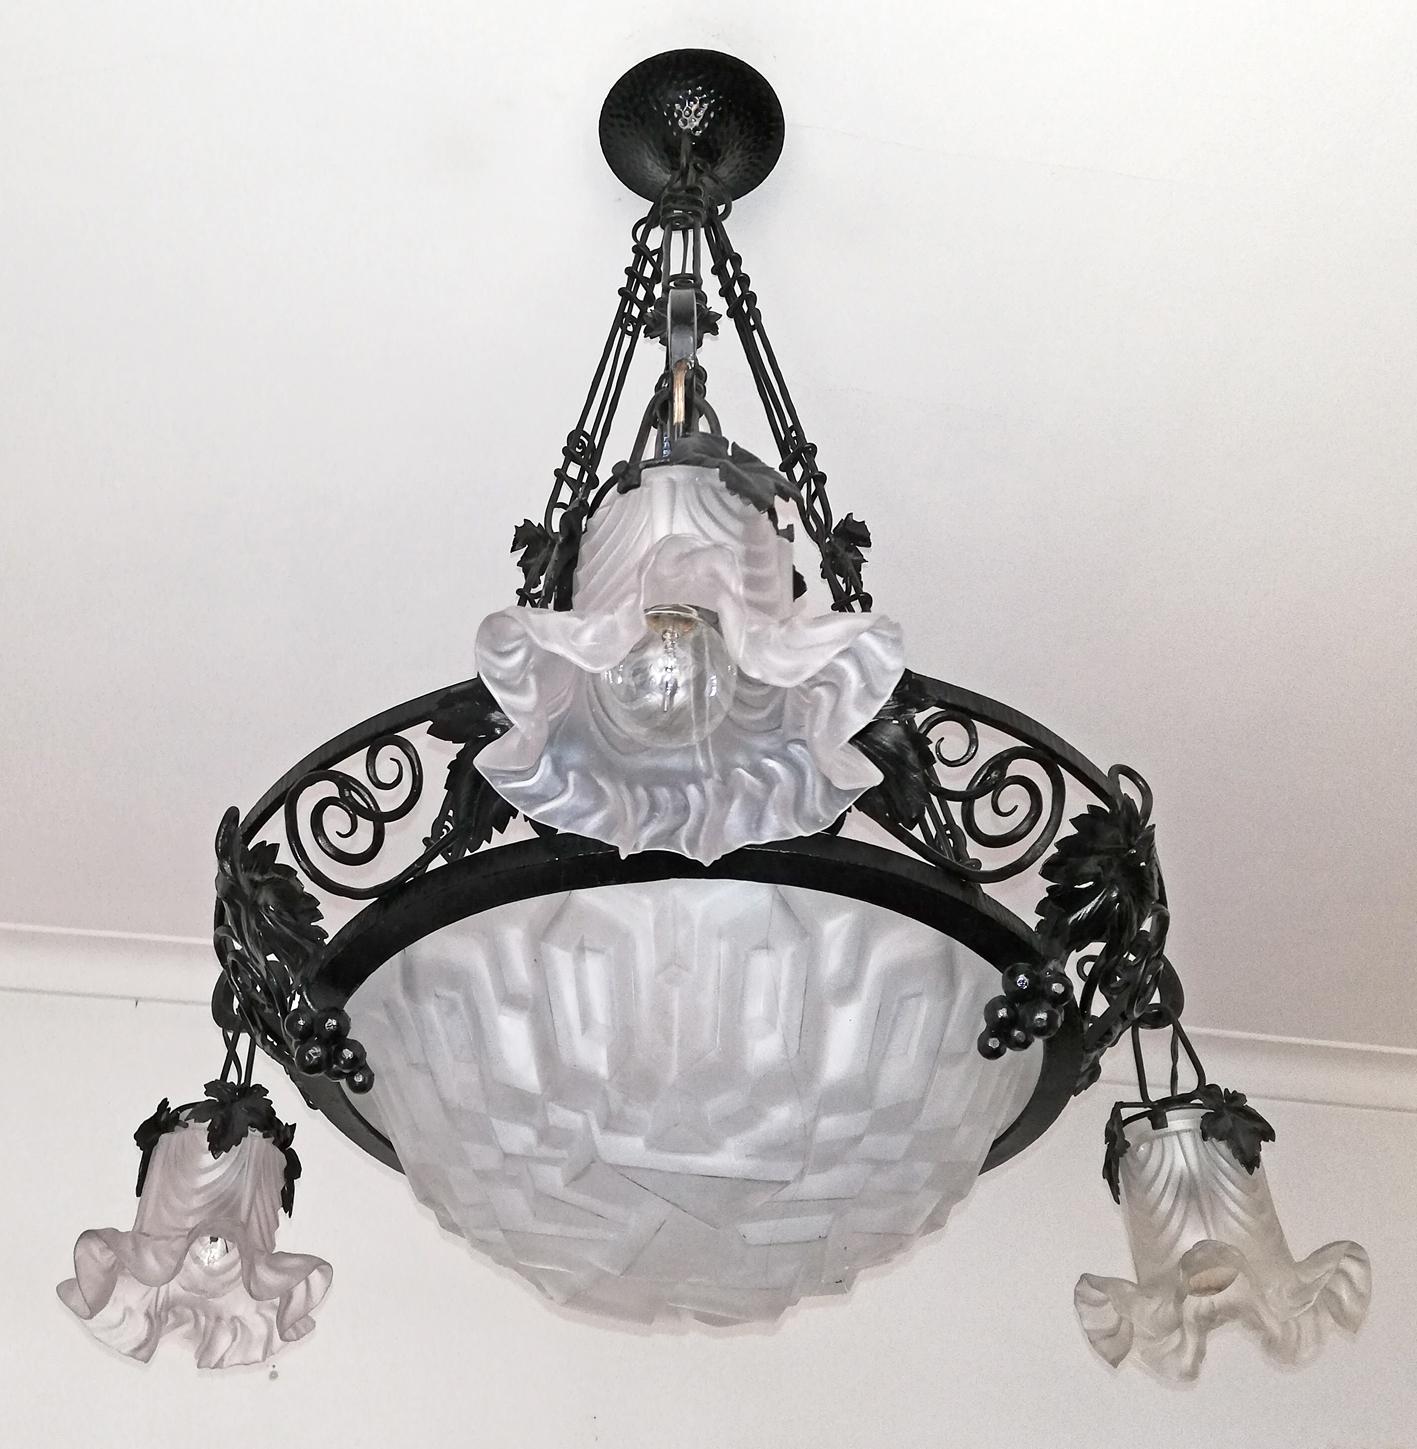 Beautiful original French signed 1930 Art Deco chandelier or pendant, signed Degue. The hand-forged wrought iron frame features intricately hand forged grape and leaf accents.

Measures:
Width 30 in / 76 cm
Height 35.5 in / 90 cm
Weight 18 lb.